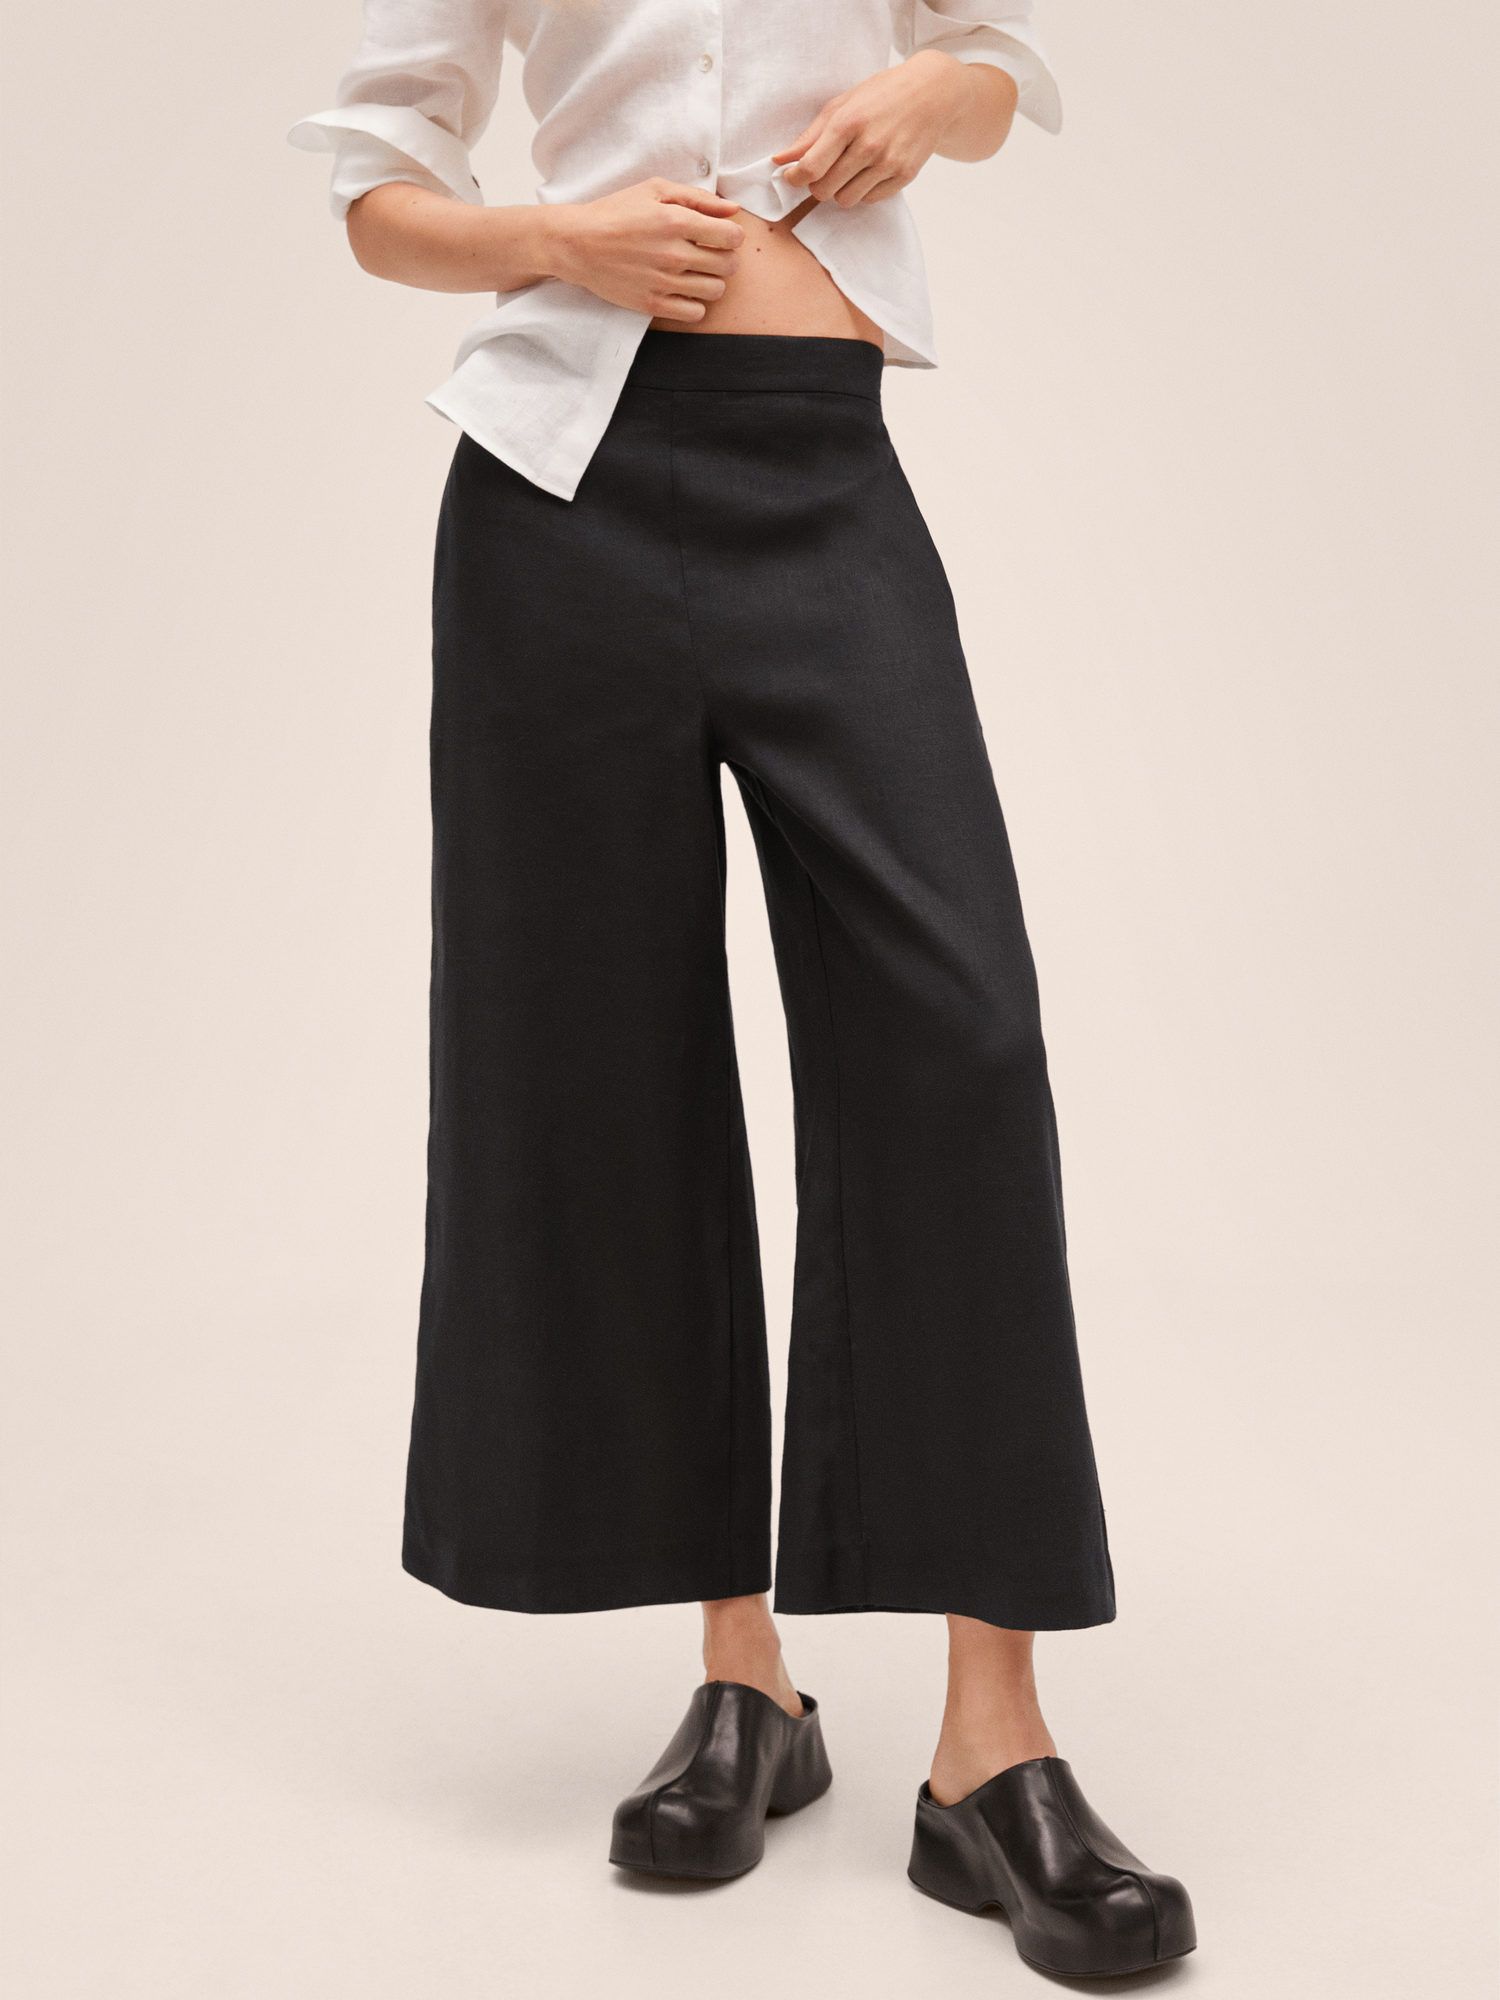 Mango Lote Linen Cropped Trousers, Black at John Lewis & Partners